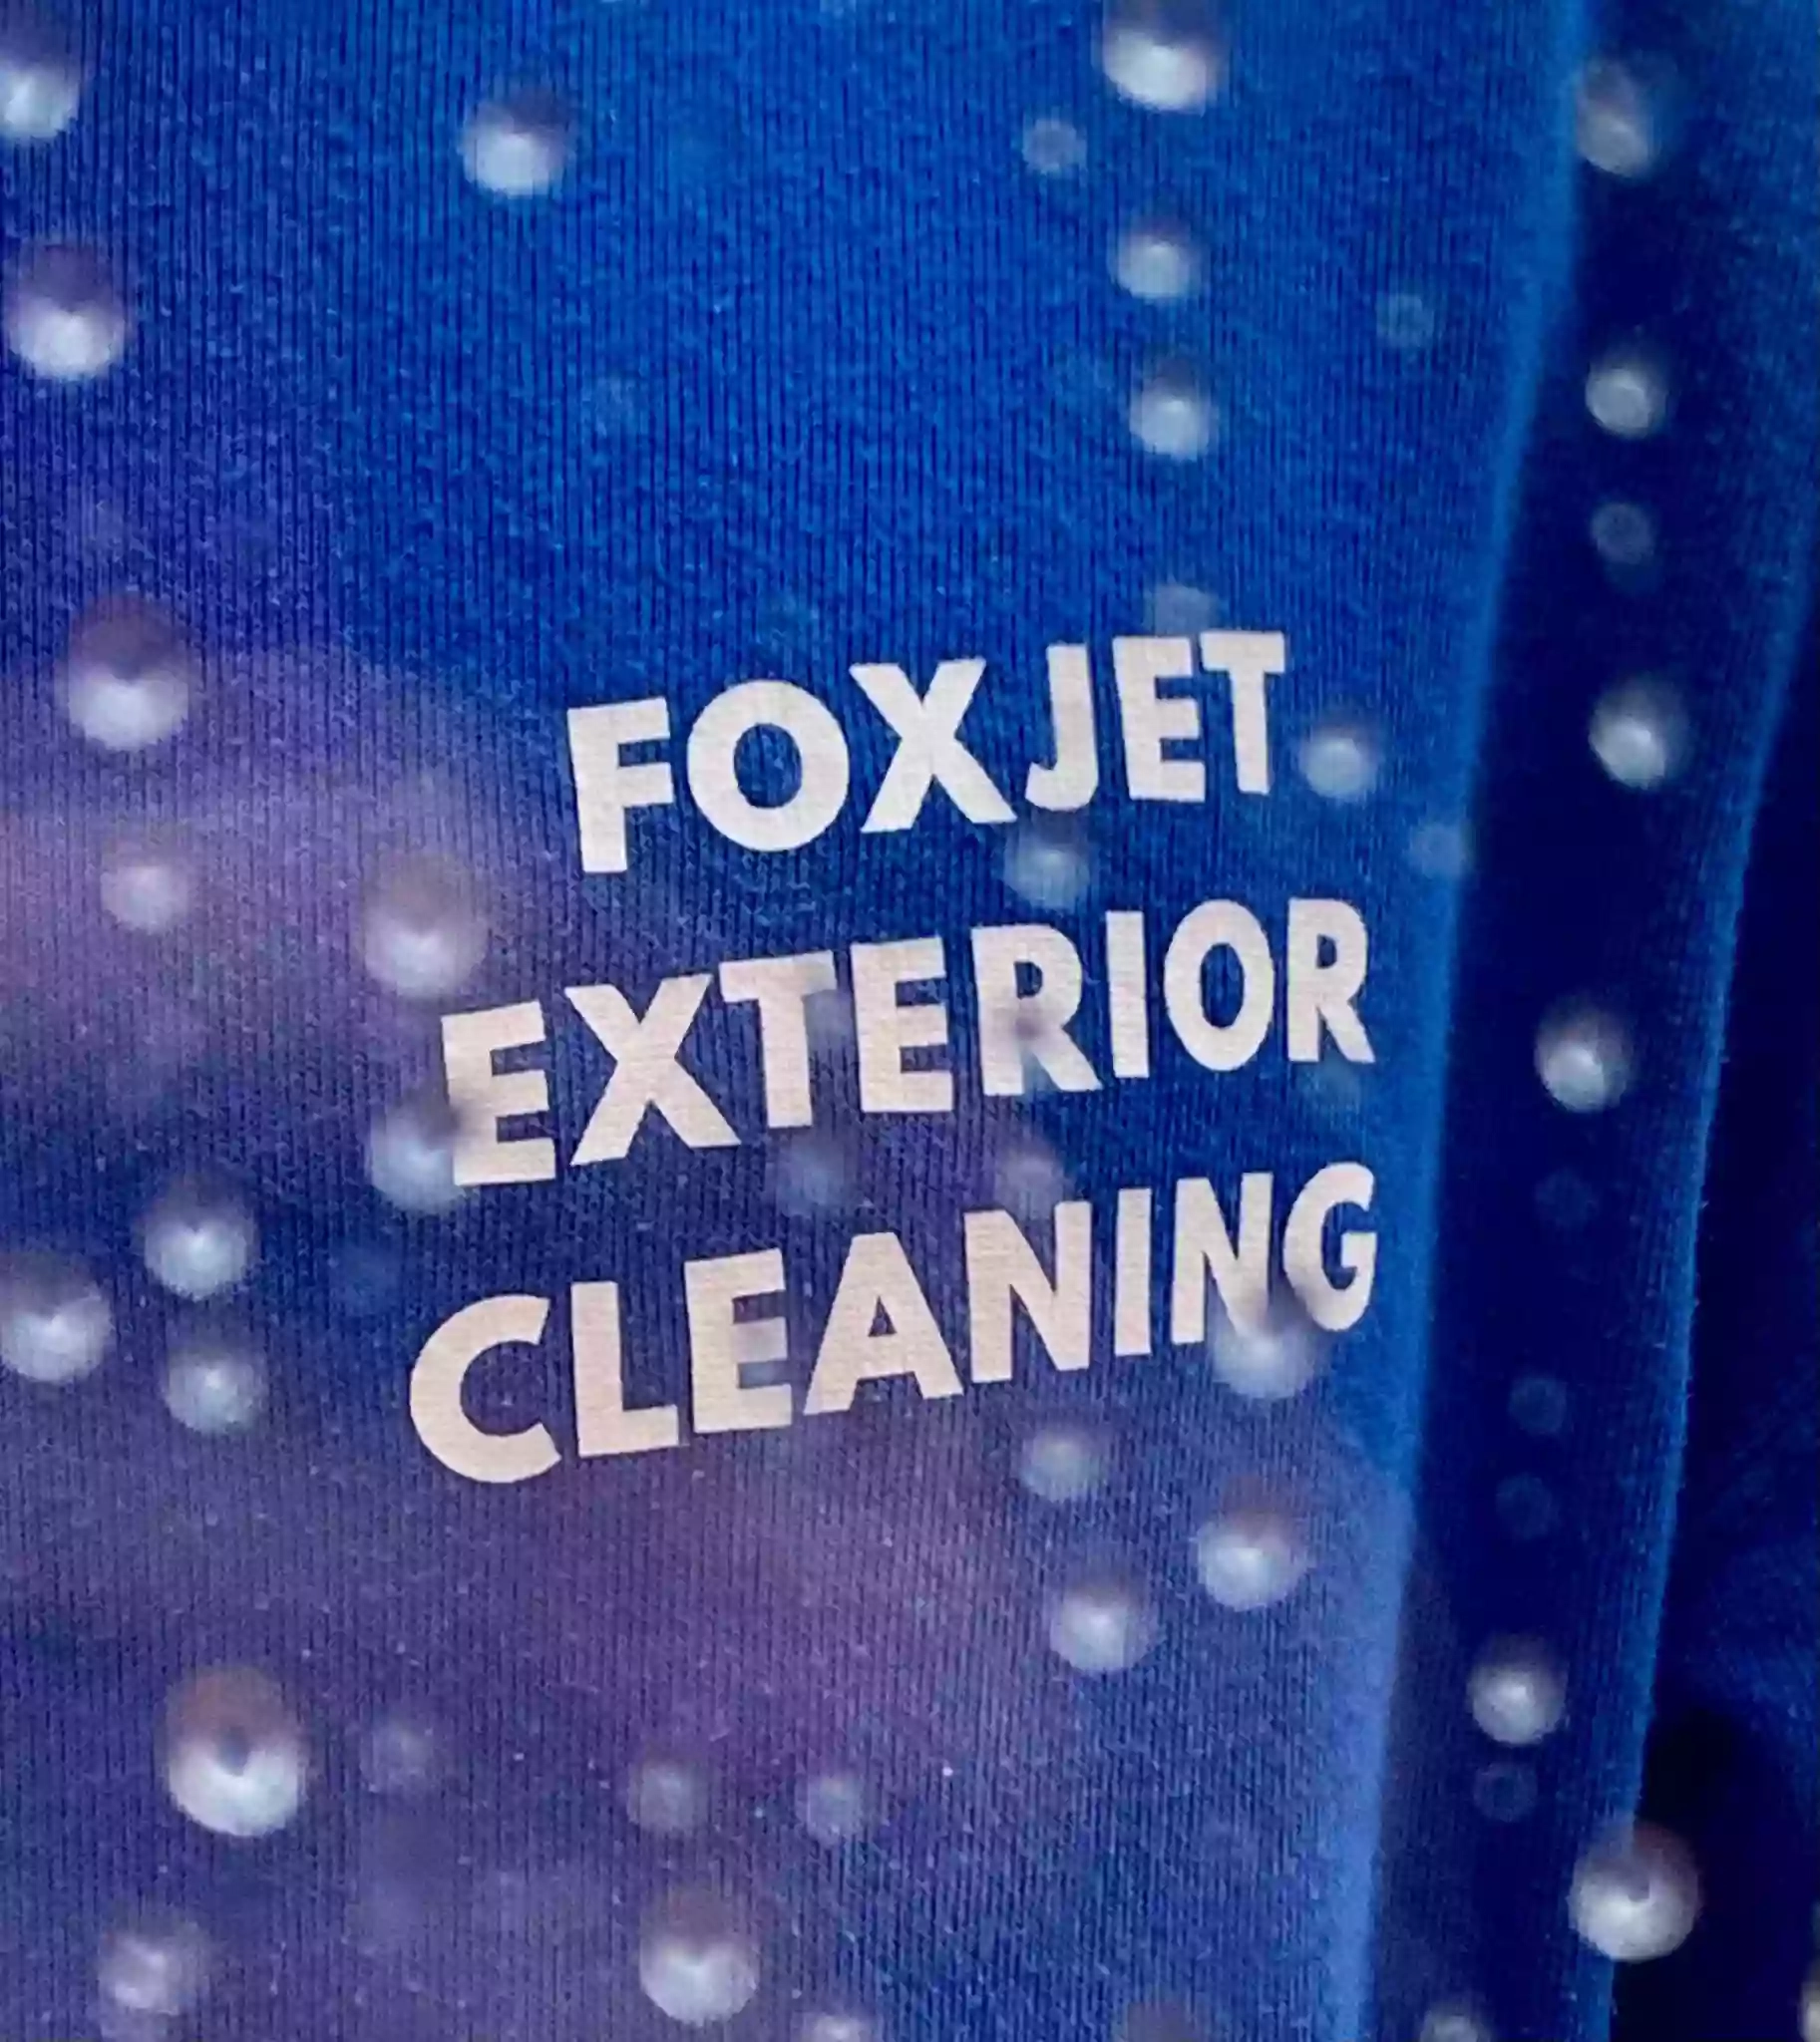 FoxJet Exterior Cleaning